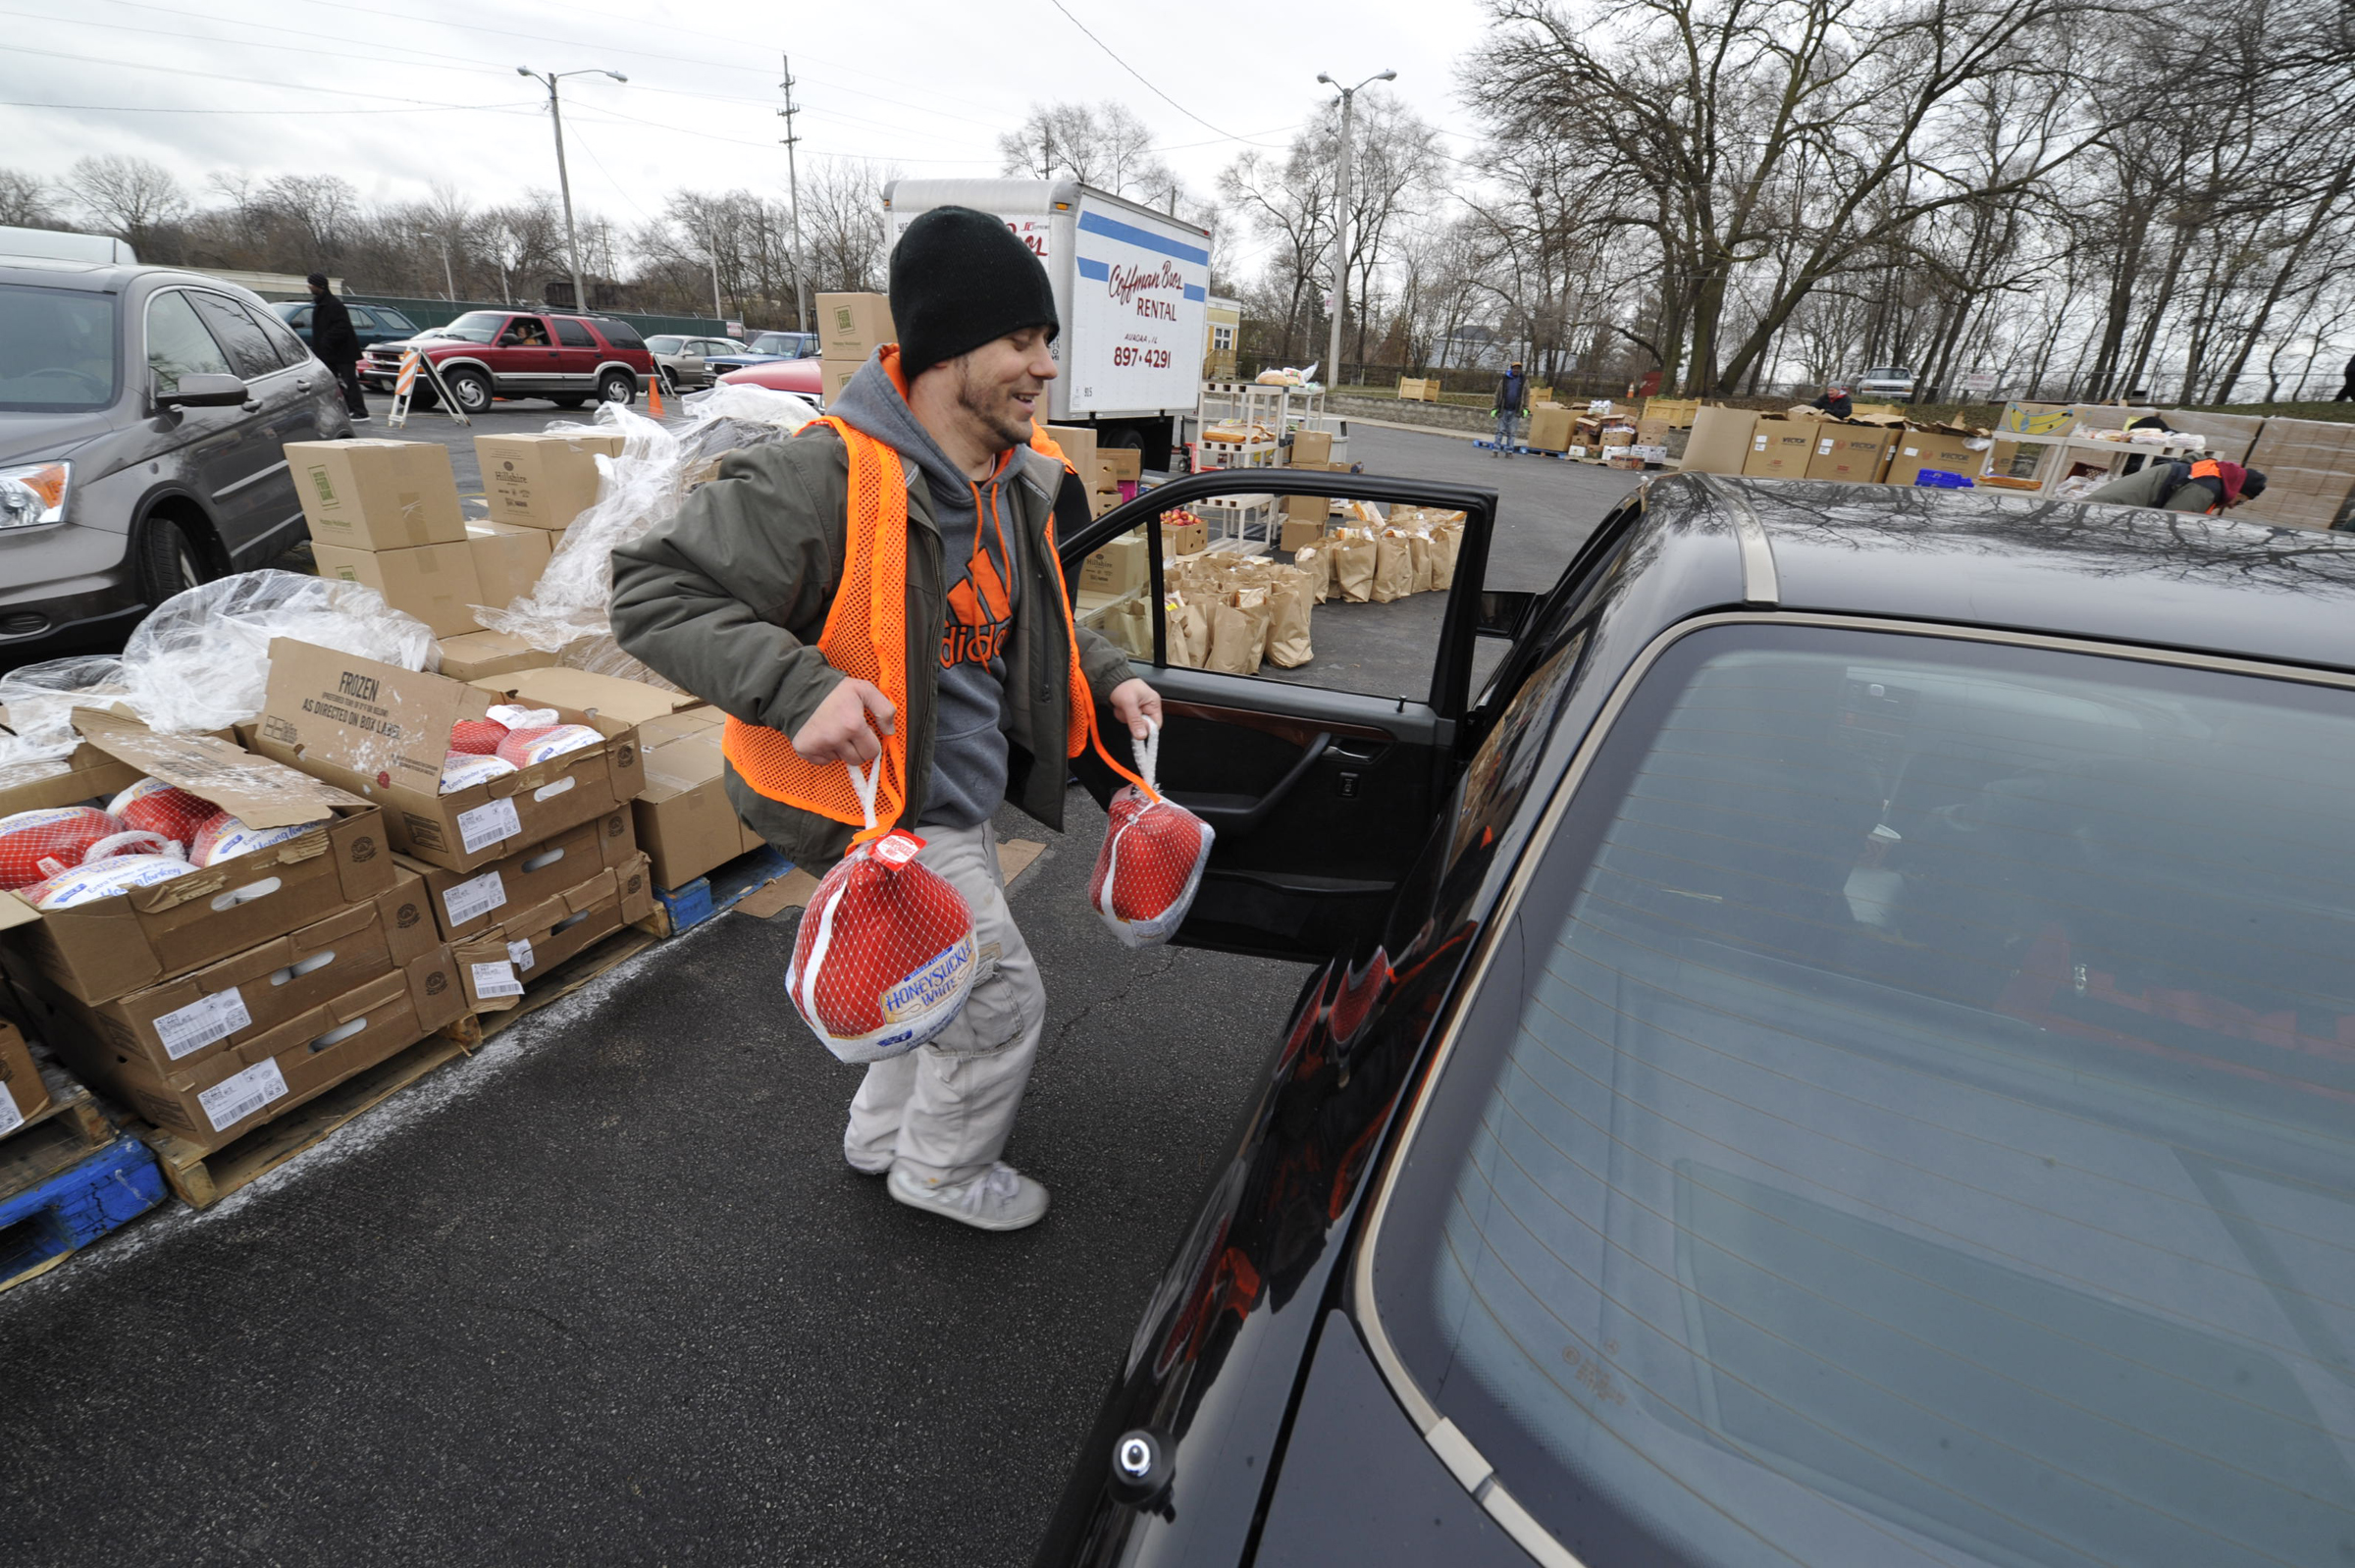 Food pantry passes out turkeys